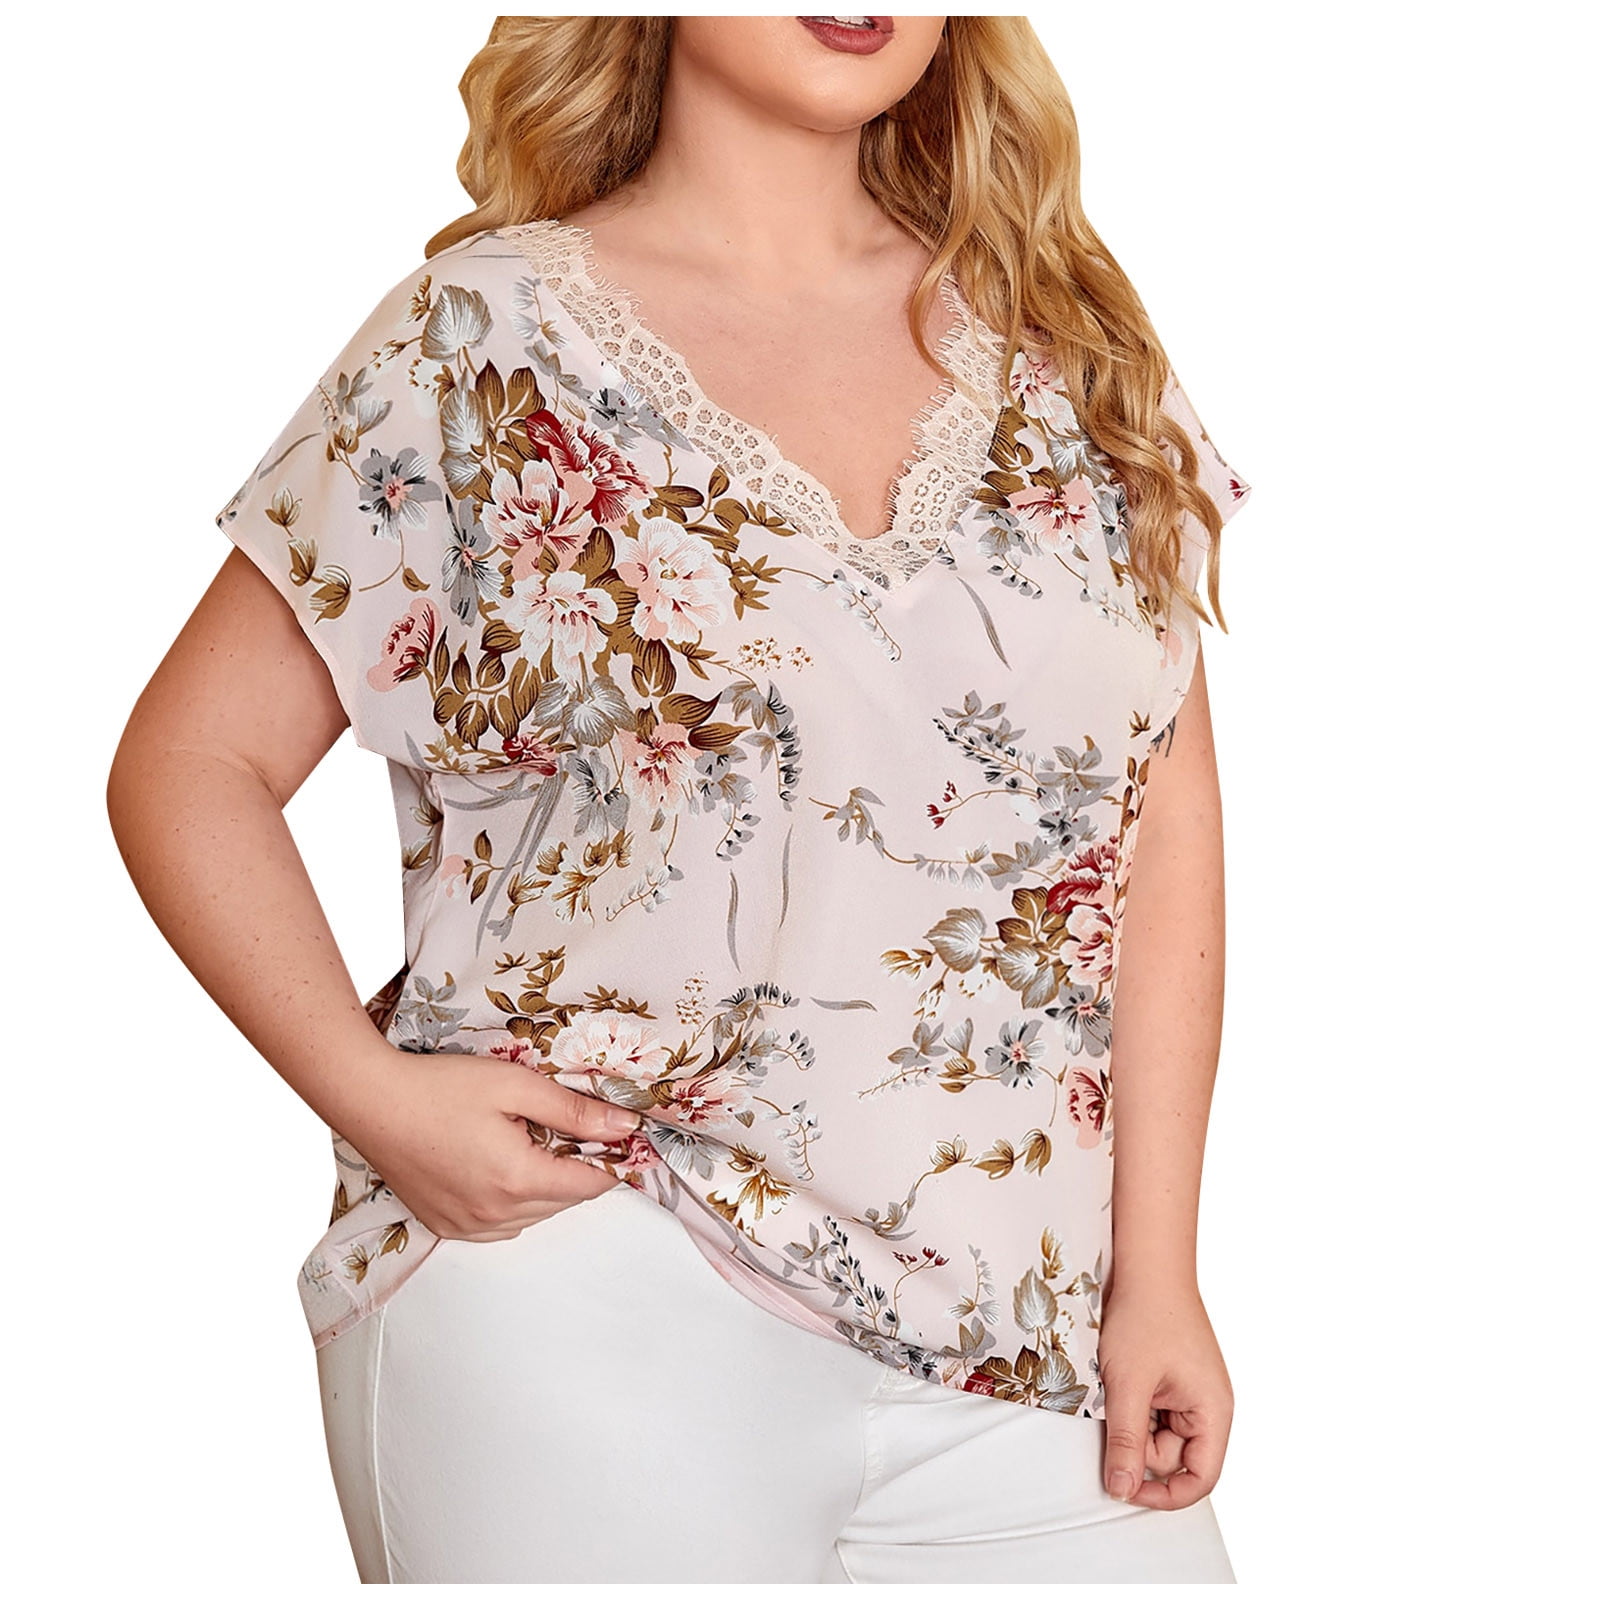 Women Plus Size Tops Fashion Lace V-Neck Short Sleeve Boho Floral T-Shirt  Summer Daily Casual Tees Blouse Pullover 